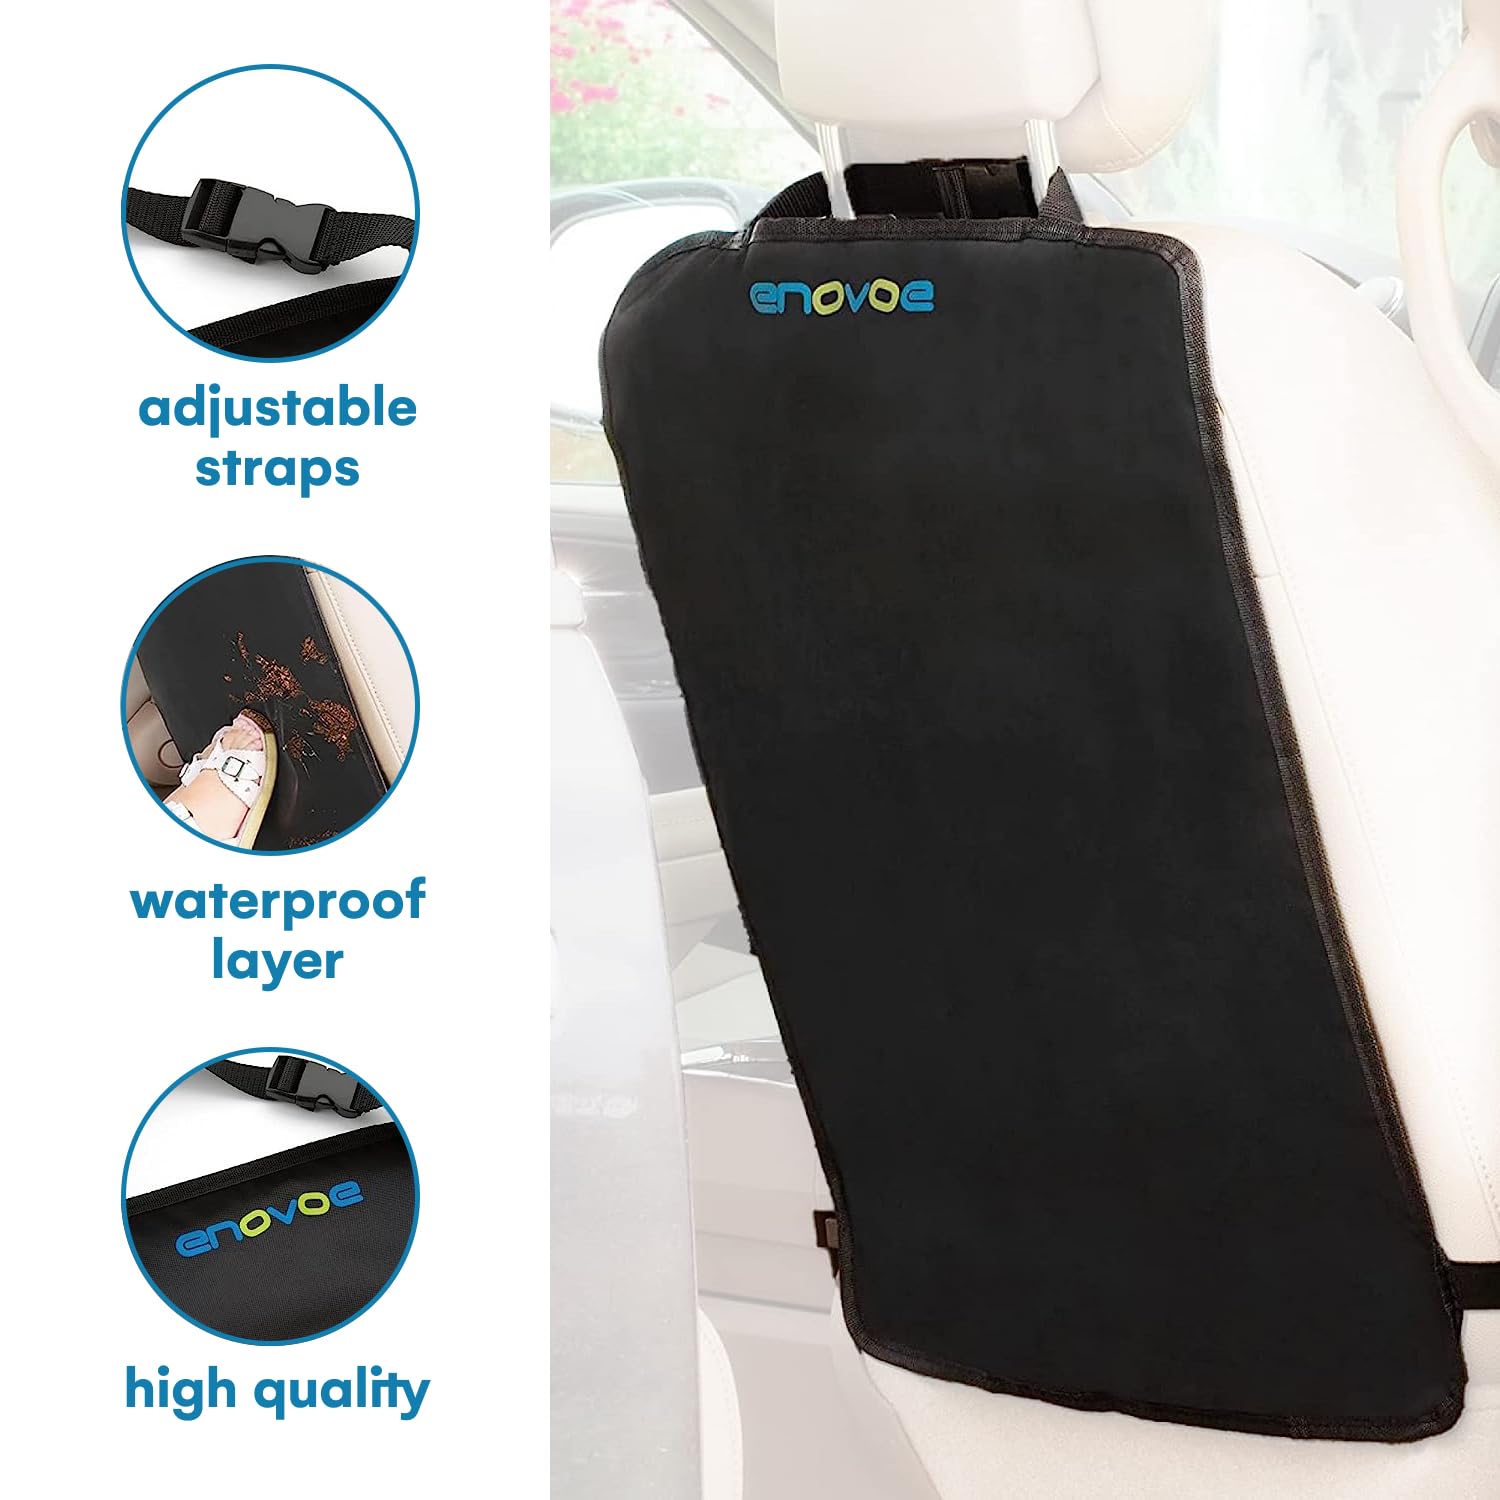 Enovoe Back Seat Protector for Kids car seat Cover - 2 Pack - Quality Car Kick Mats - Waterproof Protection for Upholstery from Dirt, Mud, Scratches - XL Car seat Back Protector Back of Driver Seat